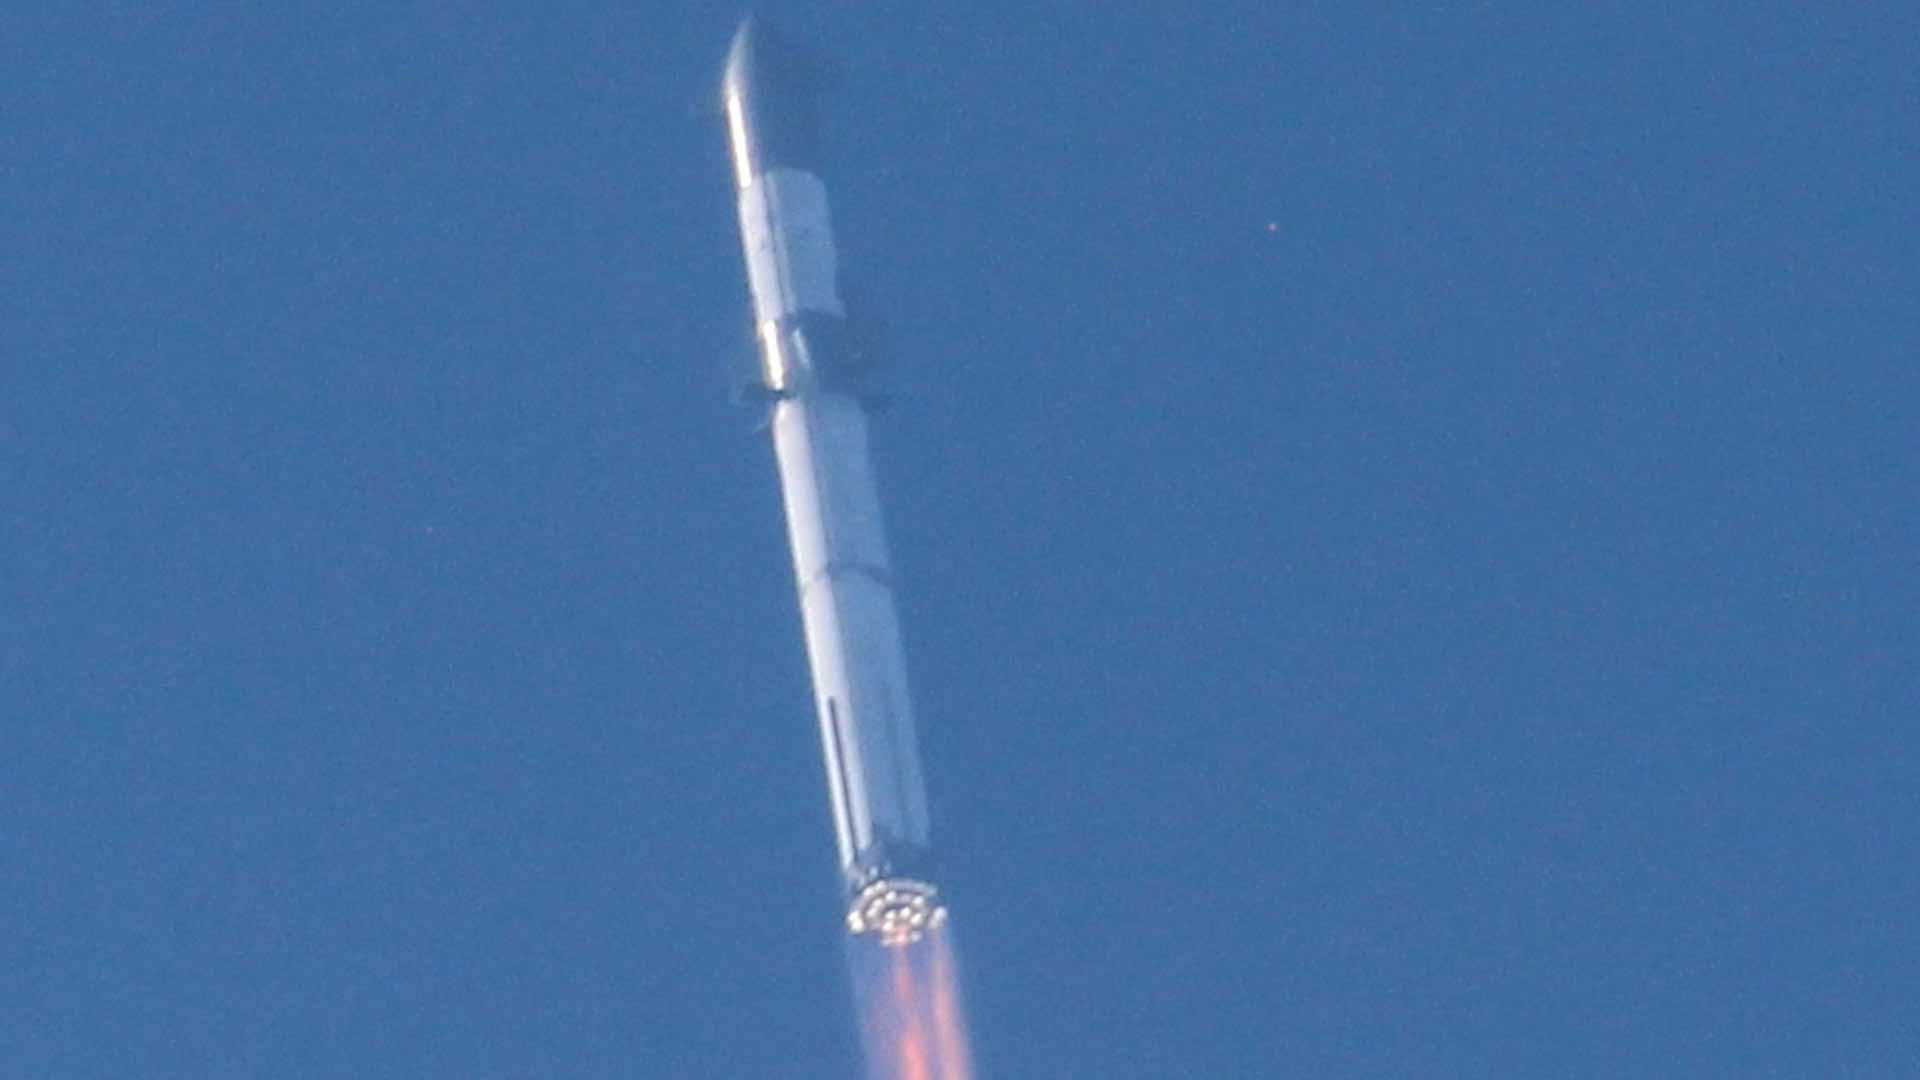 Space X Starship test launch on April 20, 2023.